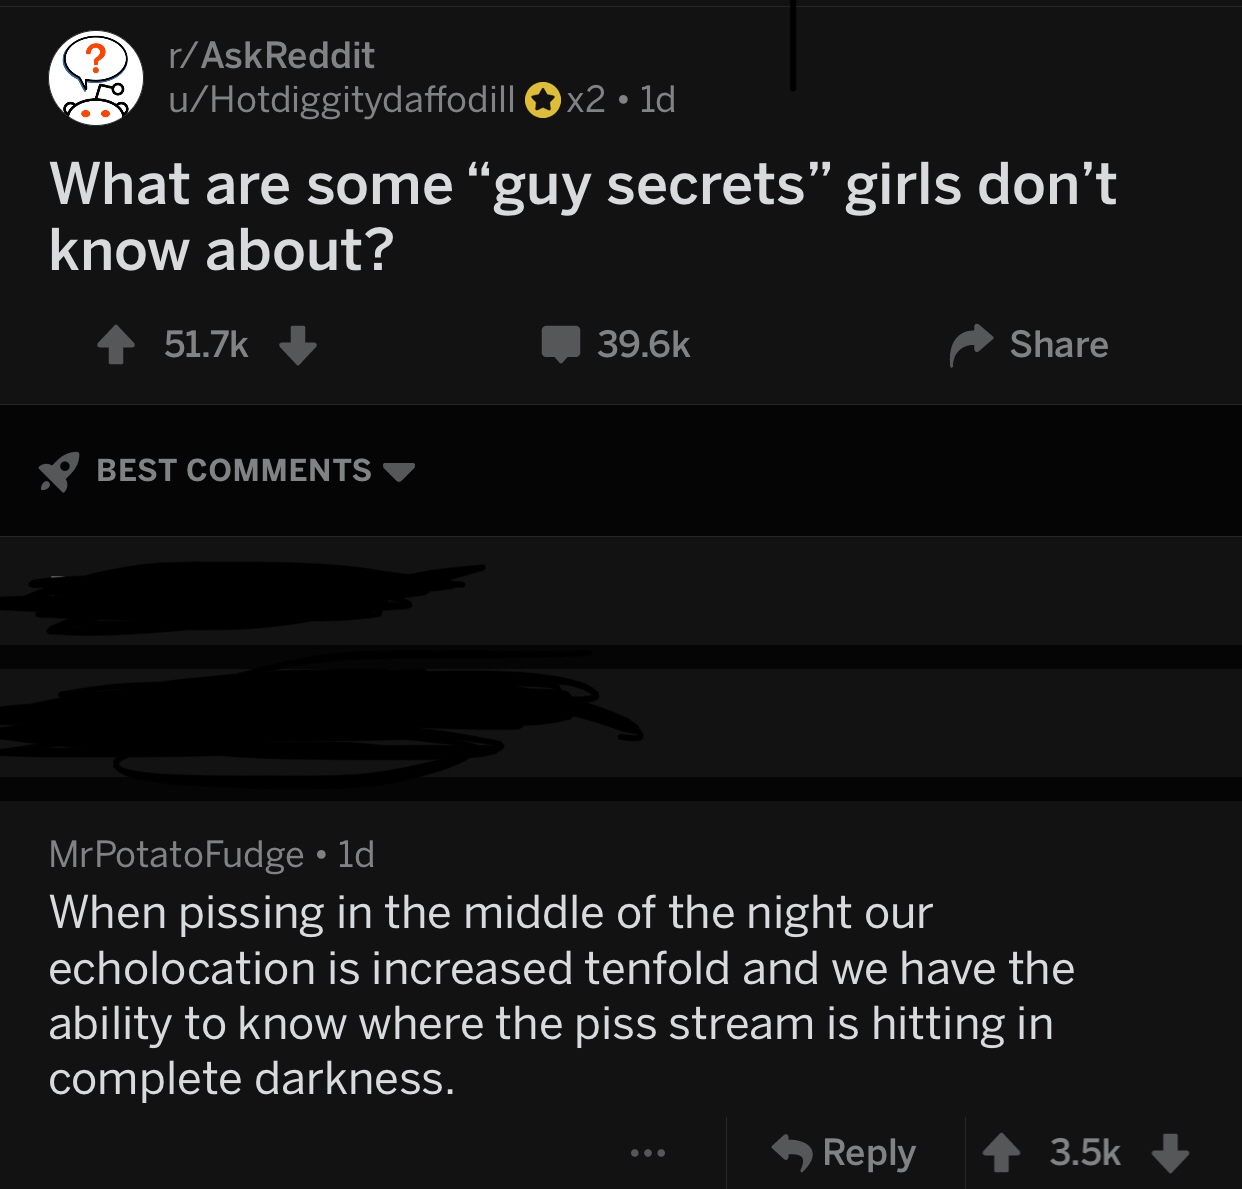 guy secret about aiming pee in the dark